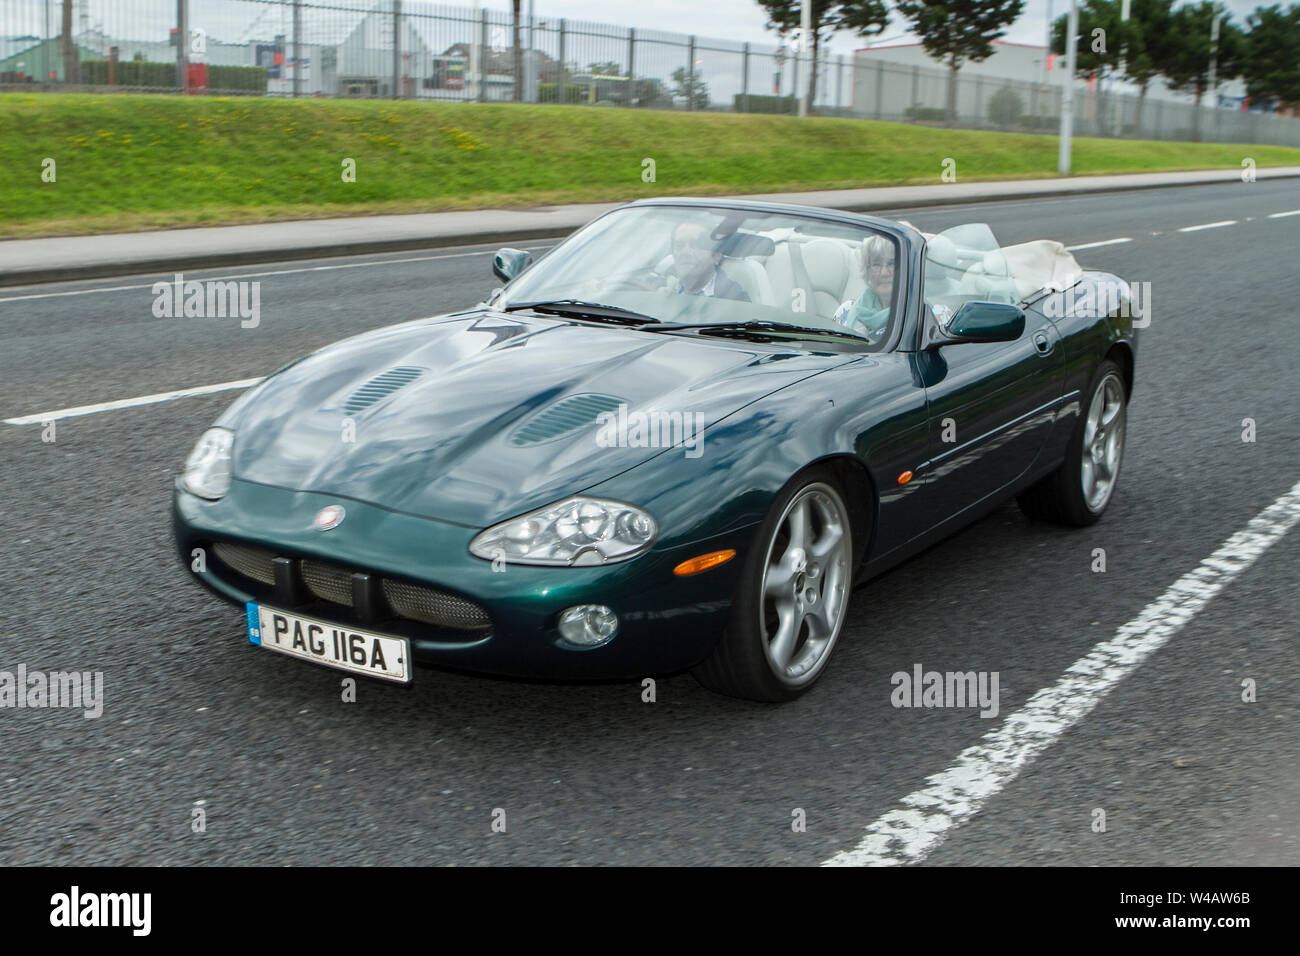 Fleetwood Festival of Transport;  2019 90s green Jaguar XKR  grand tourer; vehicles and cars attend the classic car show in Lancashire, UK Stock Photo